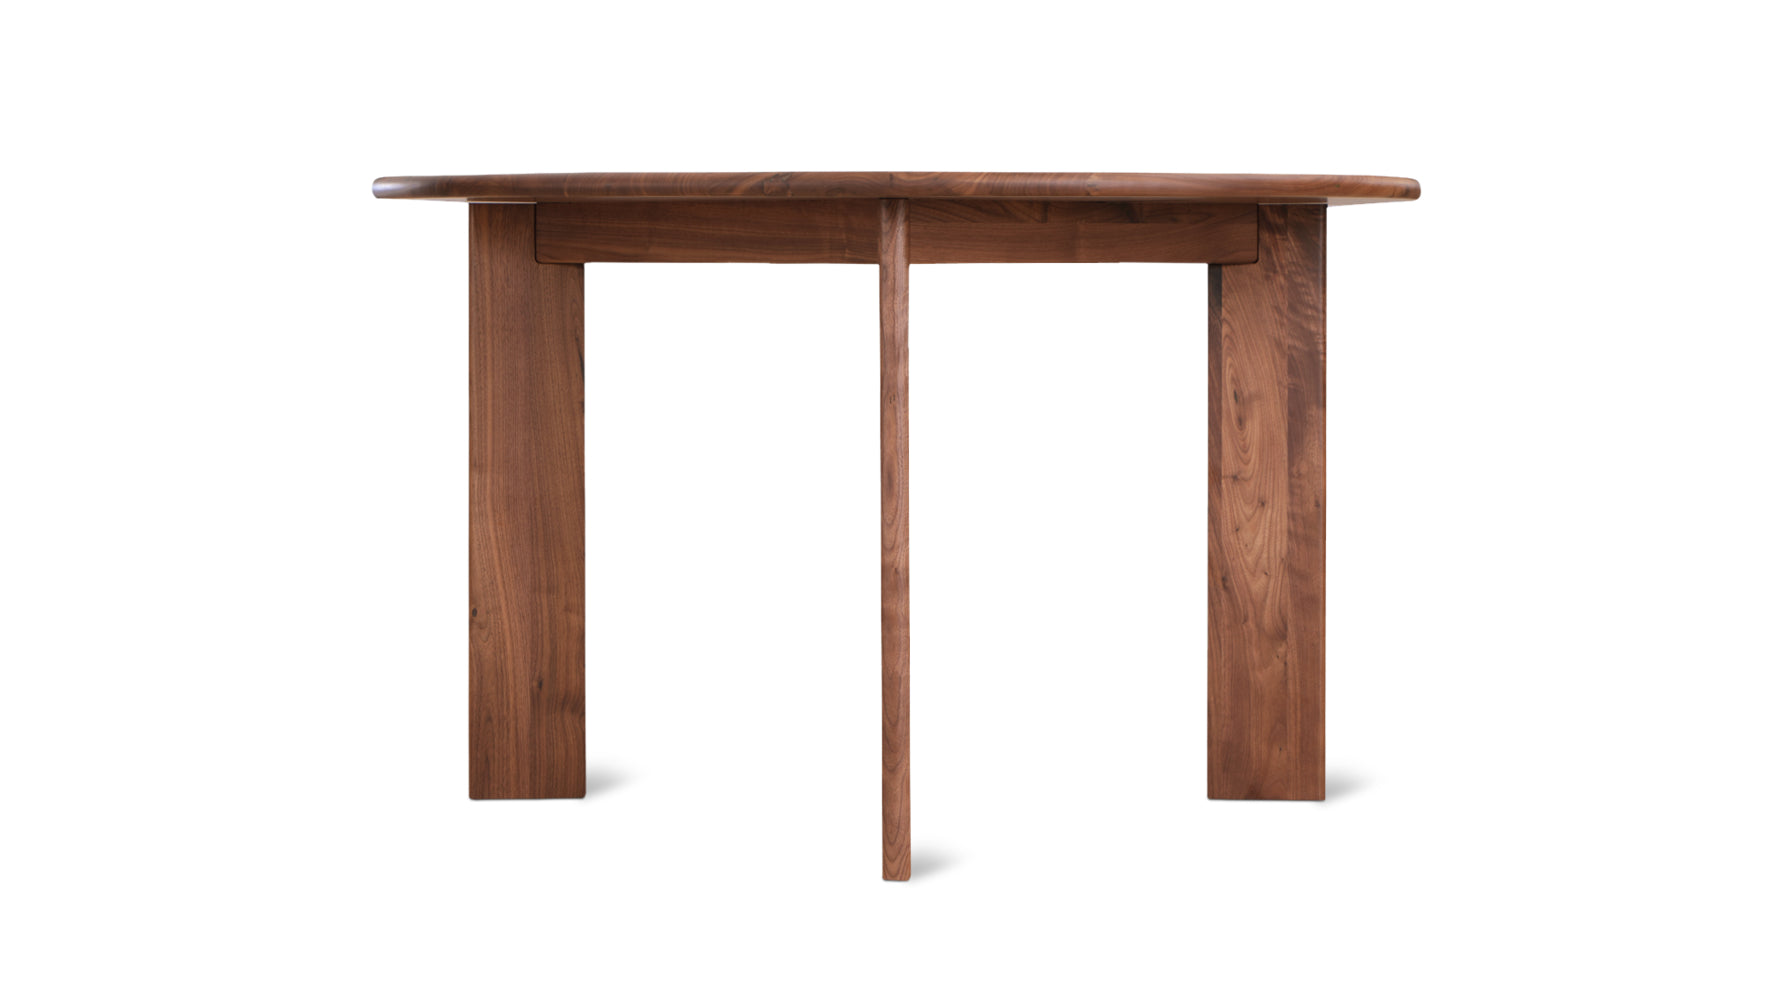 Frame Round Dining Table, Seats 4-5 People, American Walnut - Image 5